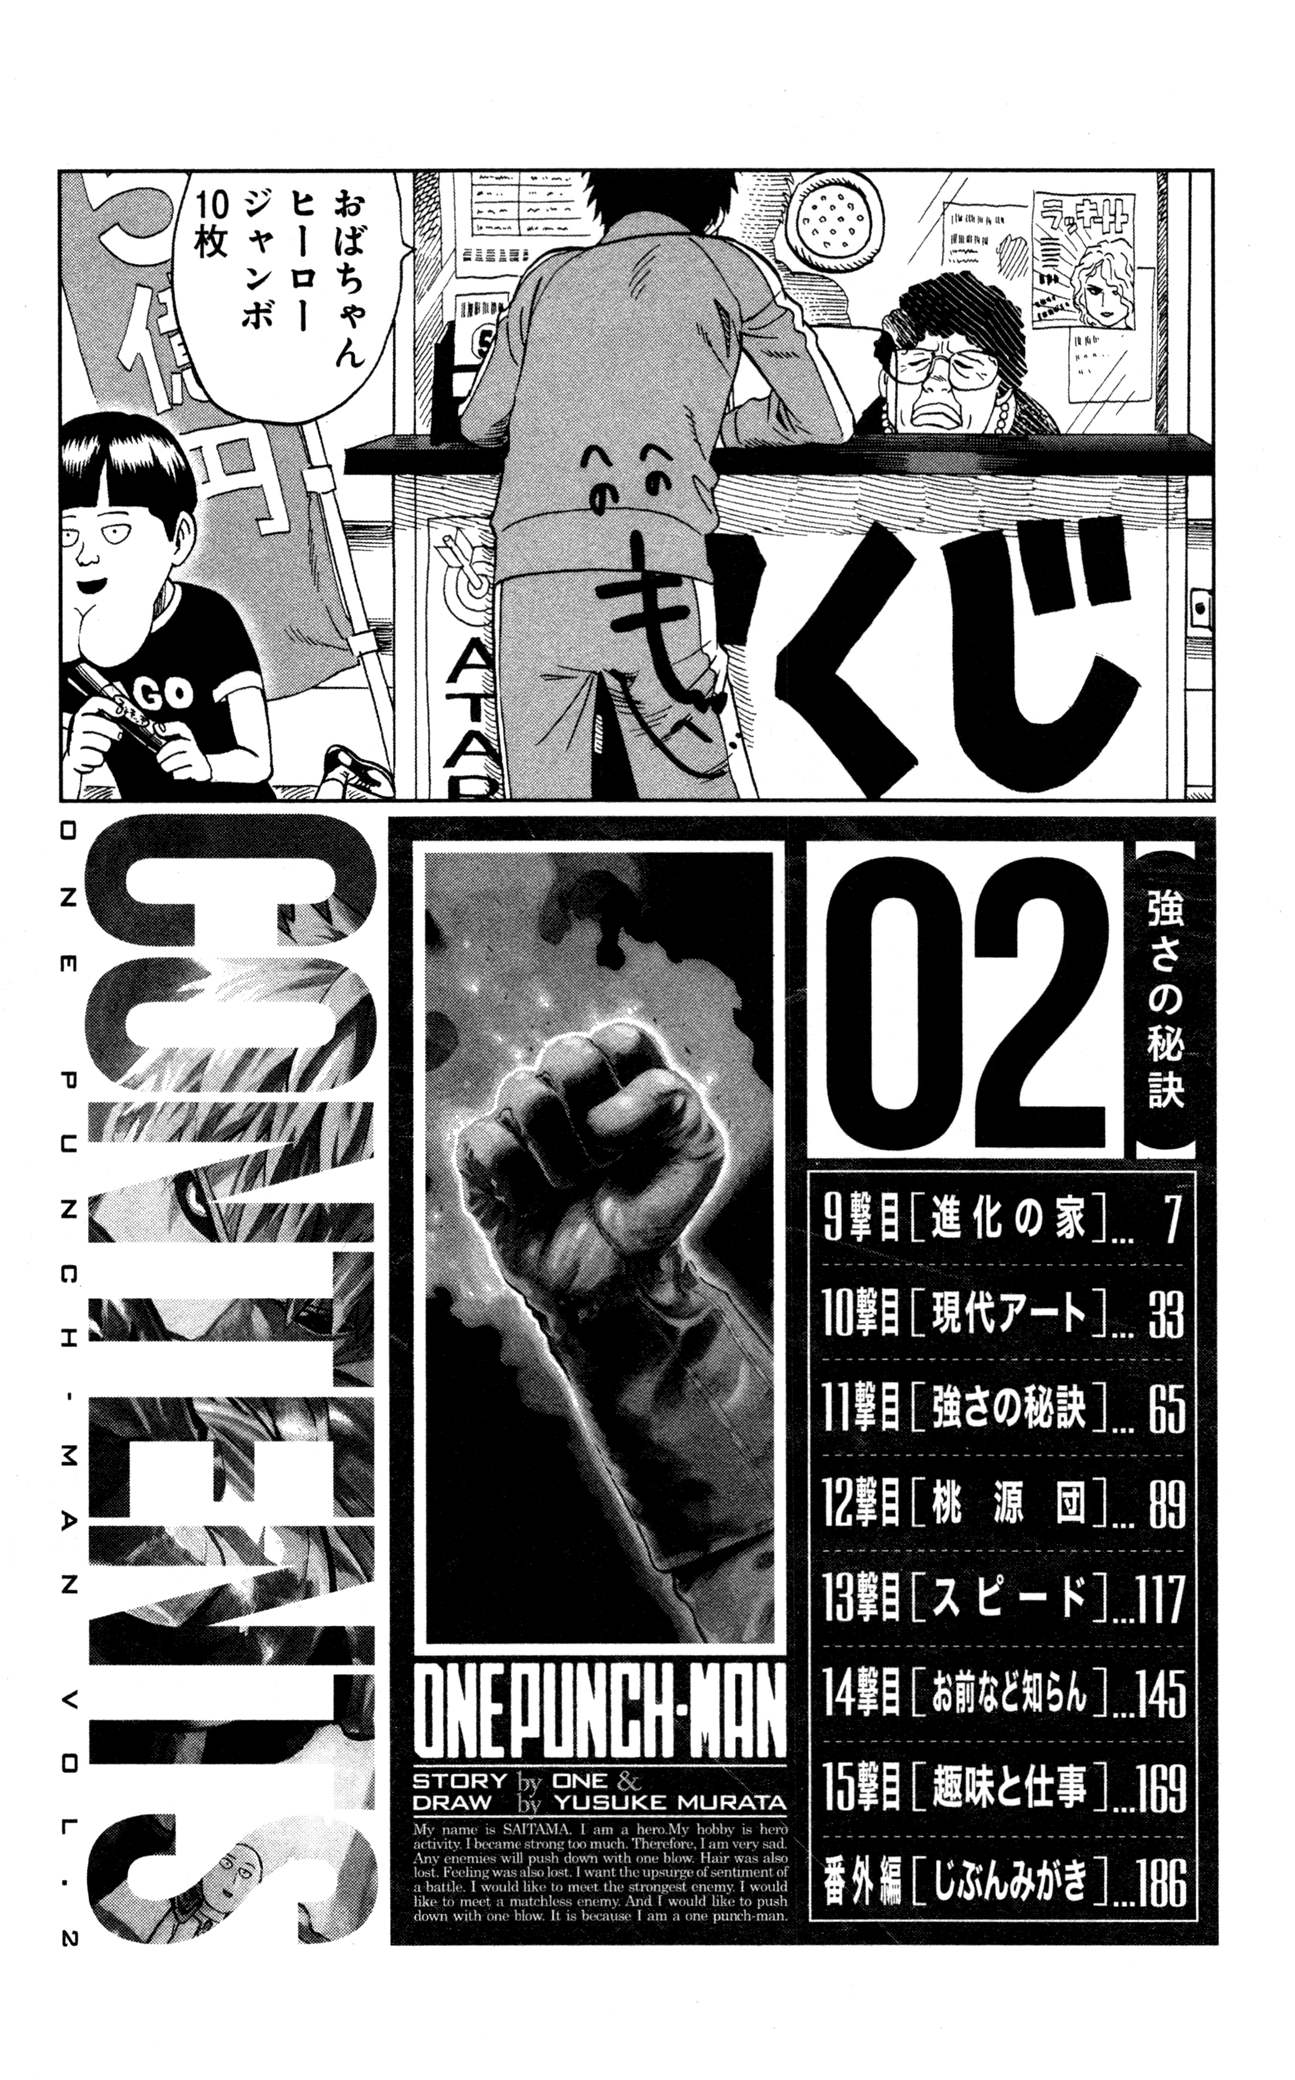 One Punch Man, Chapter 9 - House of Evolution image 10